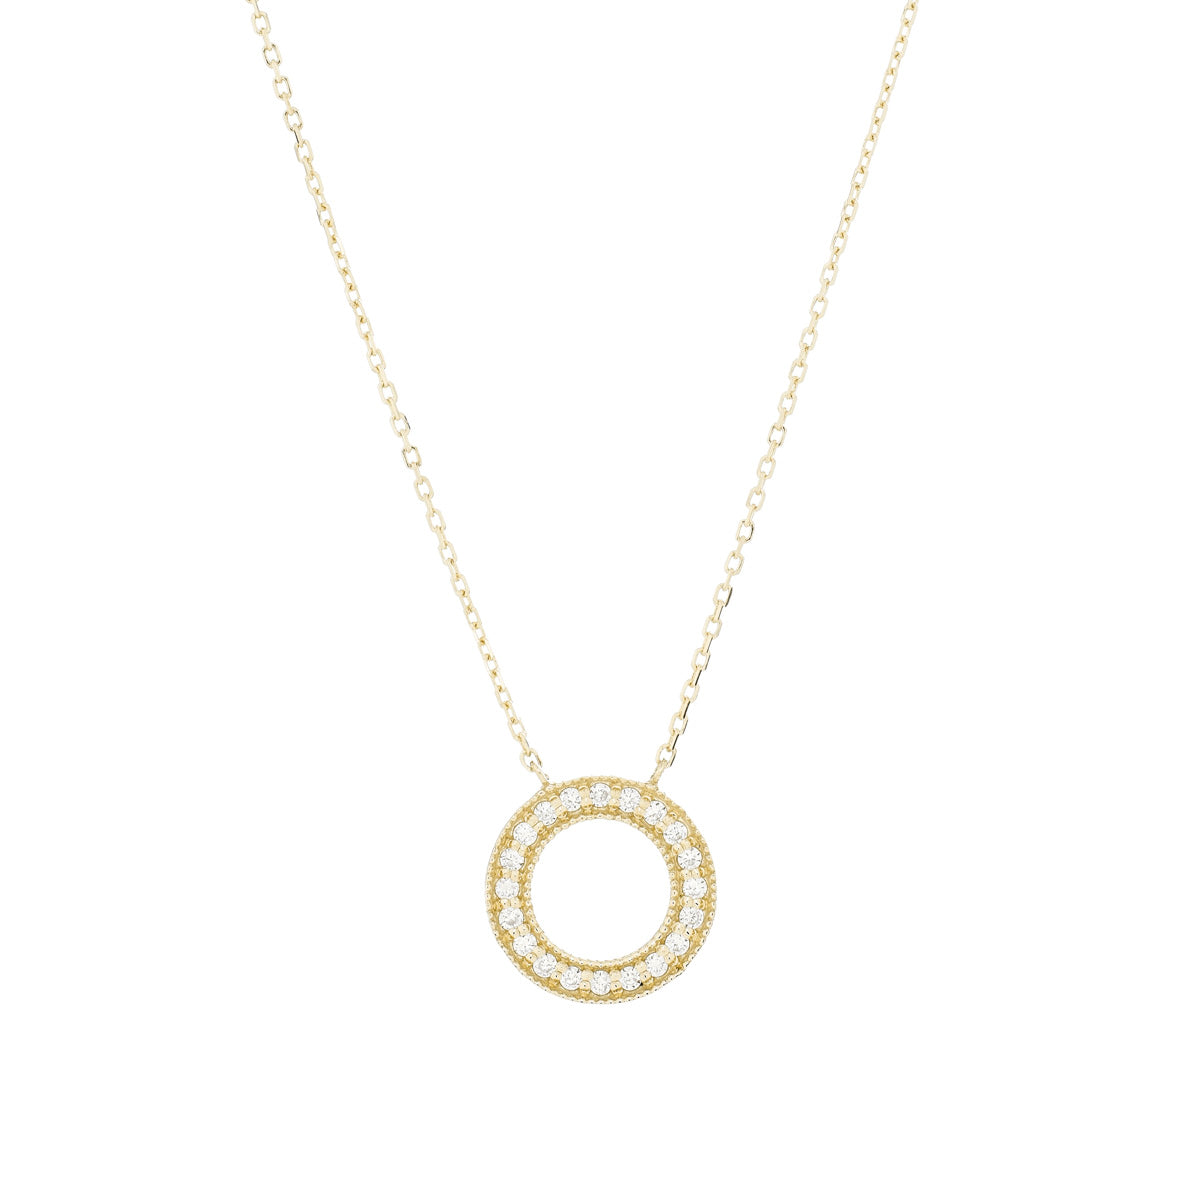 Busah 18k sterling gold and diamonds necklace